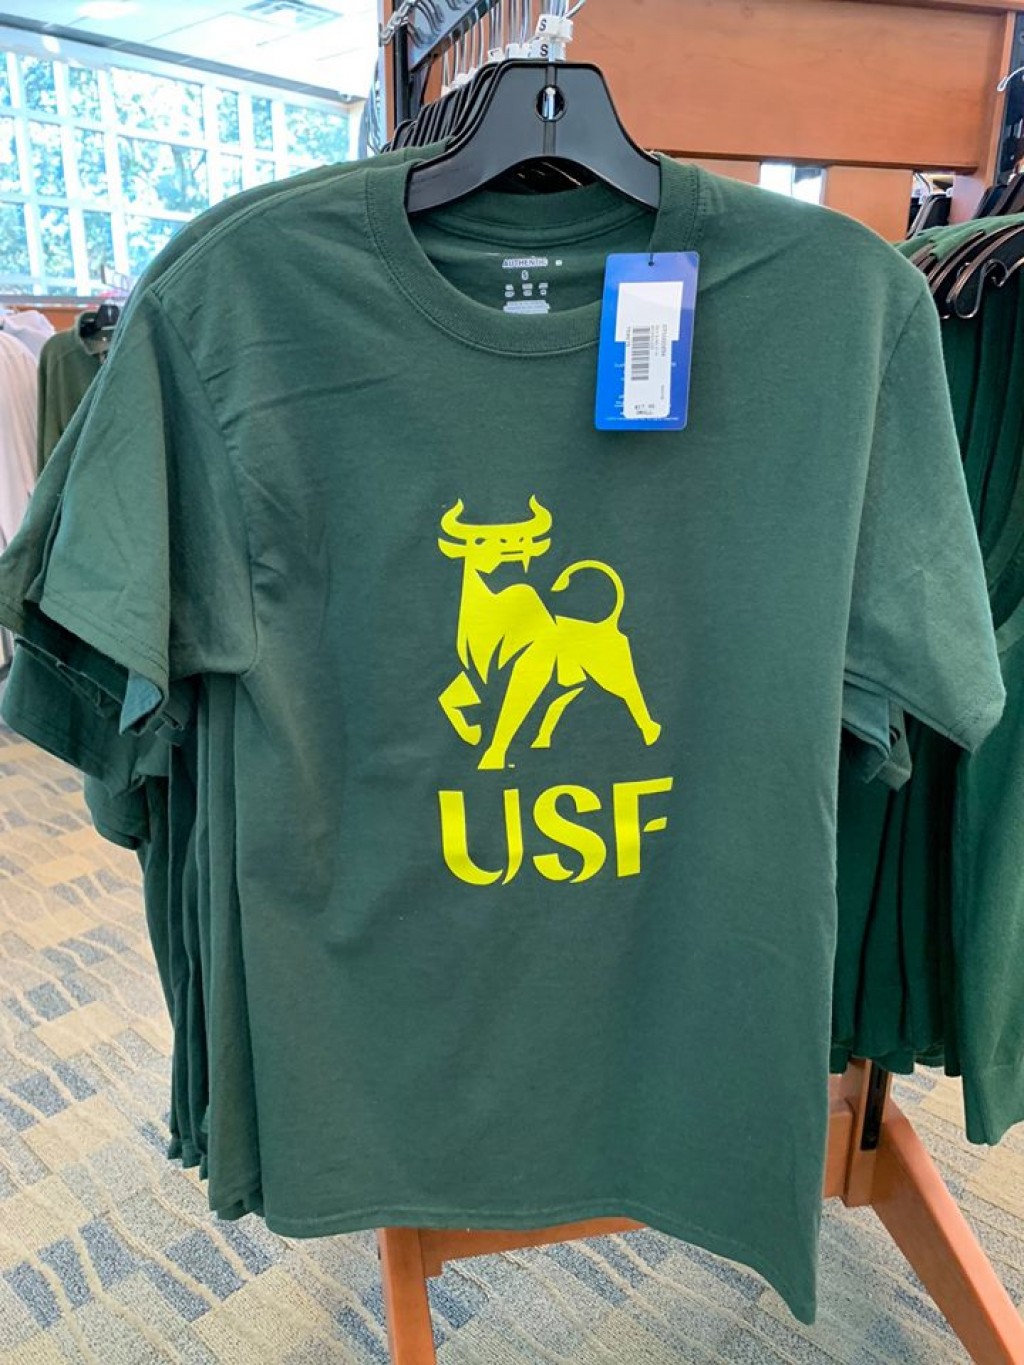 USF Bookstore adds more merchandise with new academic logo